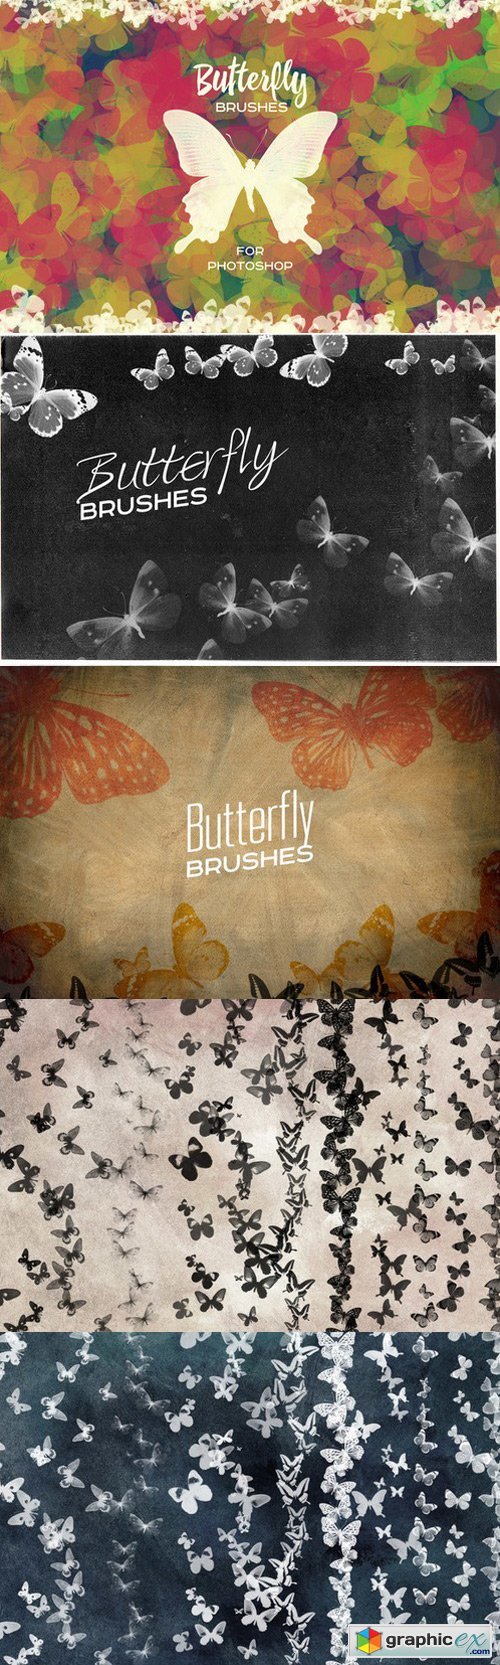 Butterfly Brushes For Photoshop 806478 